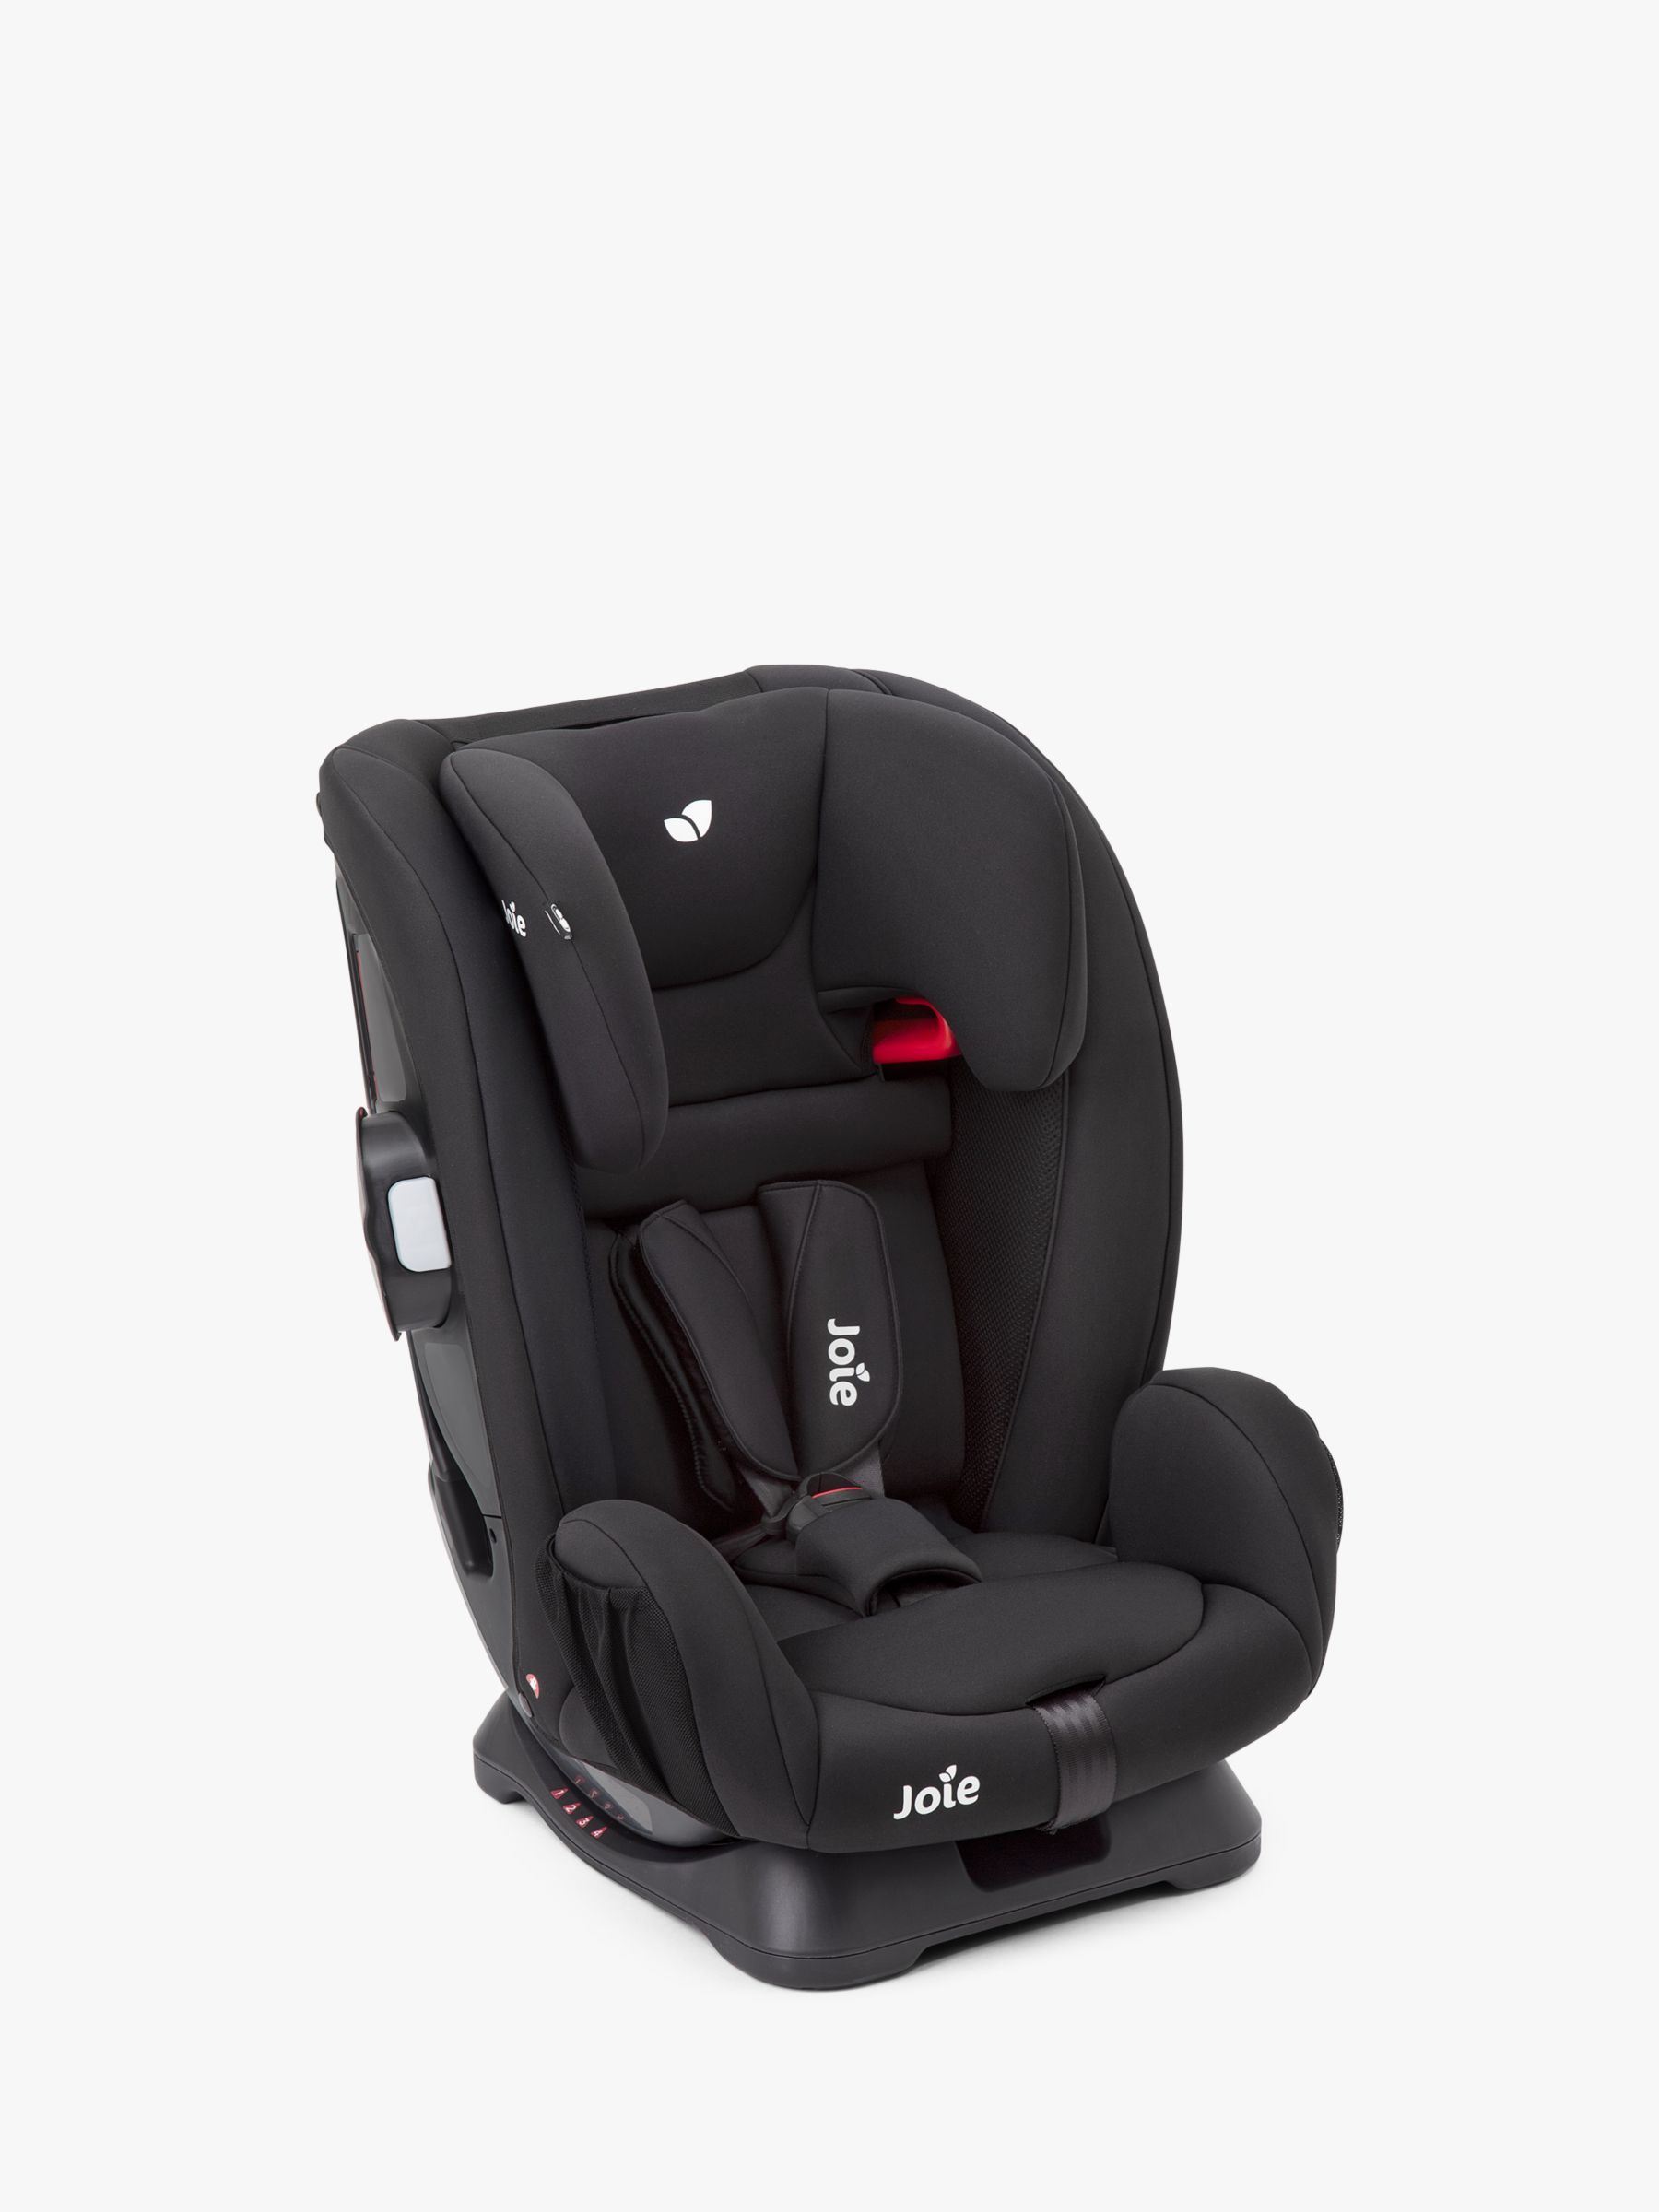 Joie Baby Fortifi Group 1/2/3 Car Seat, Coal